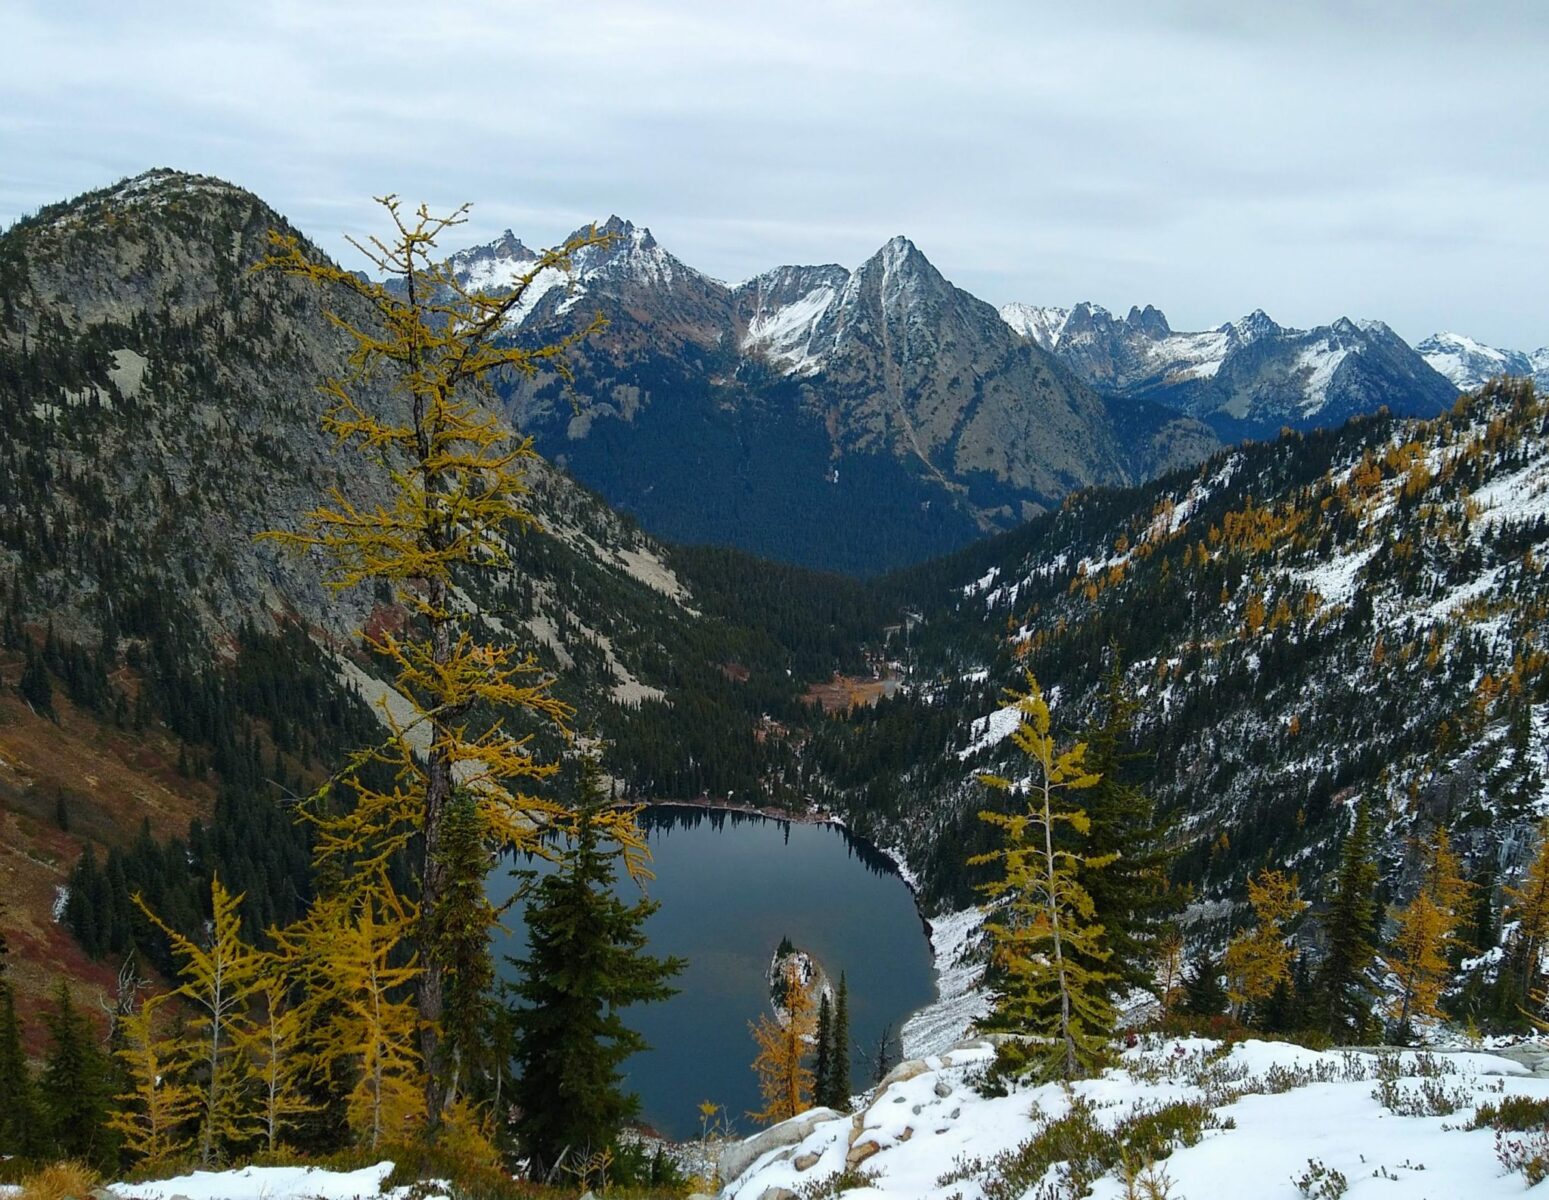 An alpine lake surrounded by forested mountains on the Maple Pass Loop in the North Cascades. There are golden larch trees in the foreground and high snowy mountains in the background